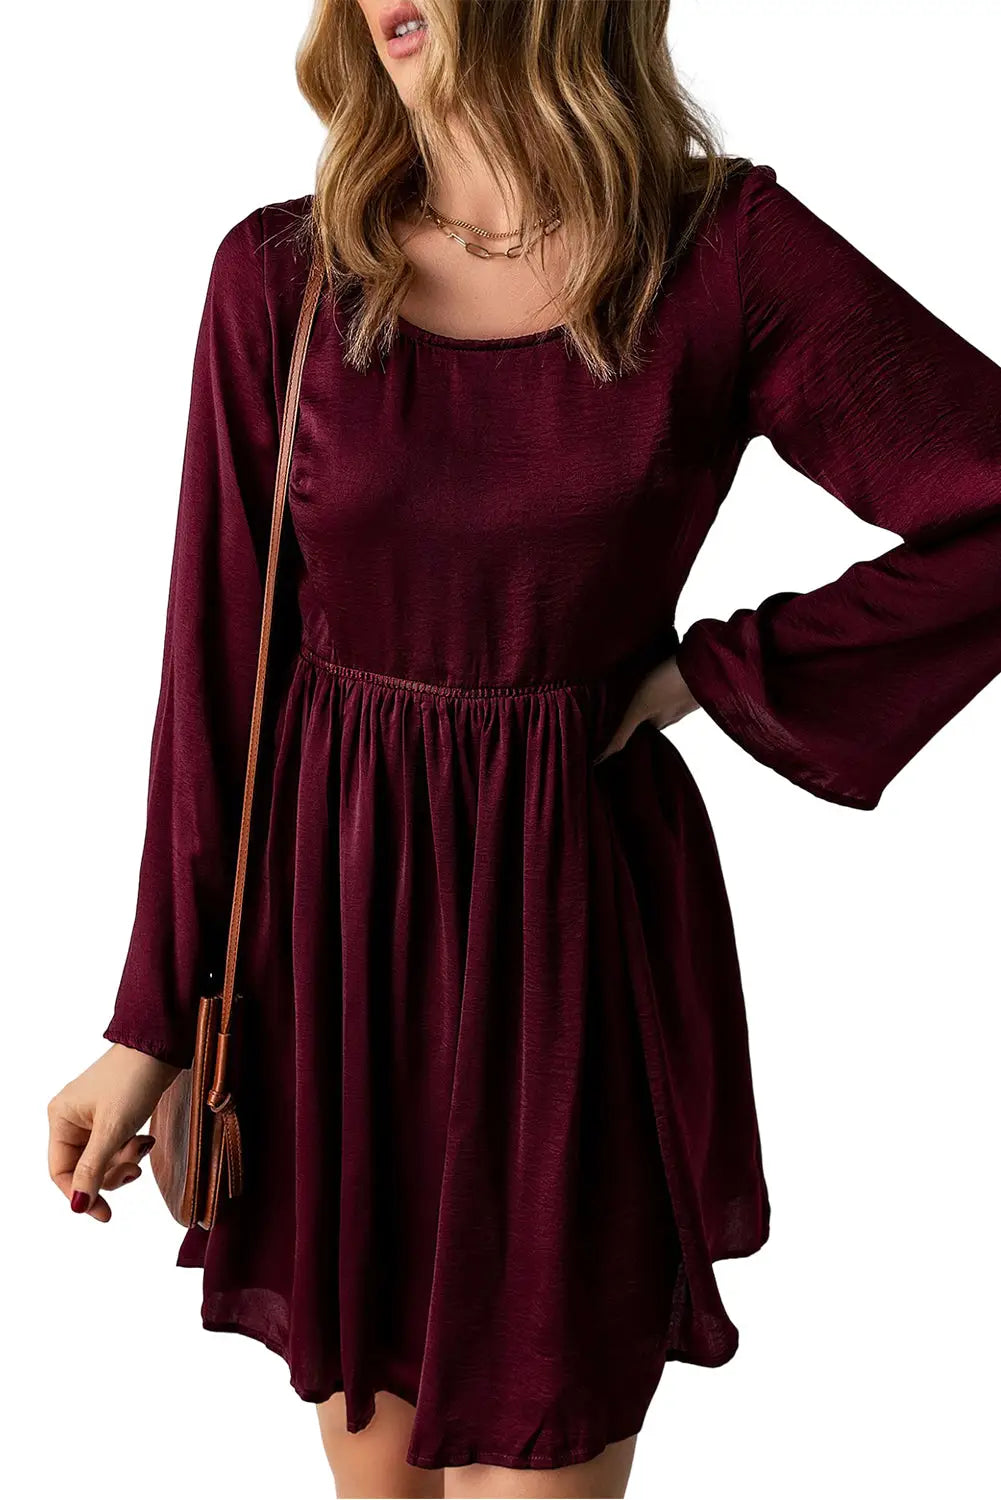 Purple buttoned sheer lace back long sleeve dress - xl / 100% polyester - mini dresses